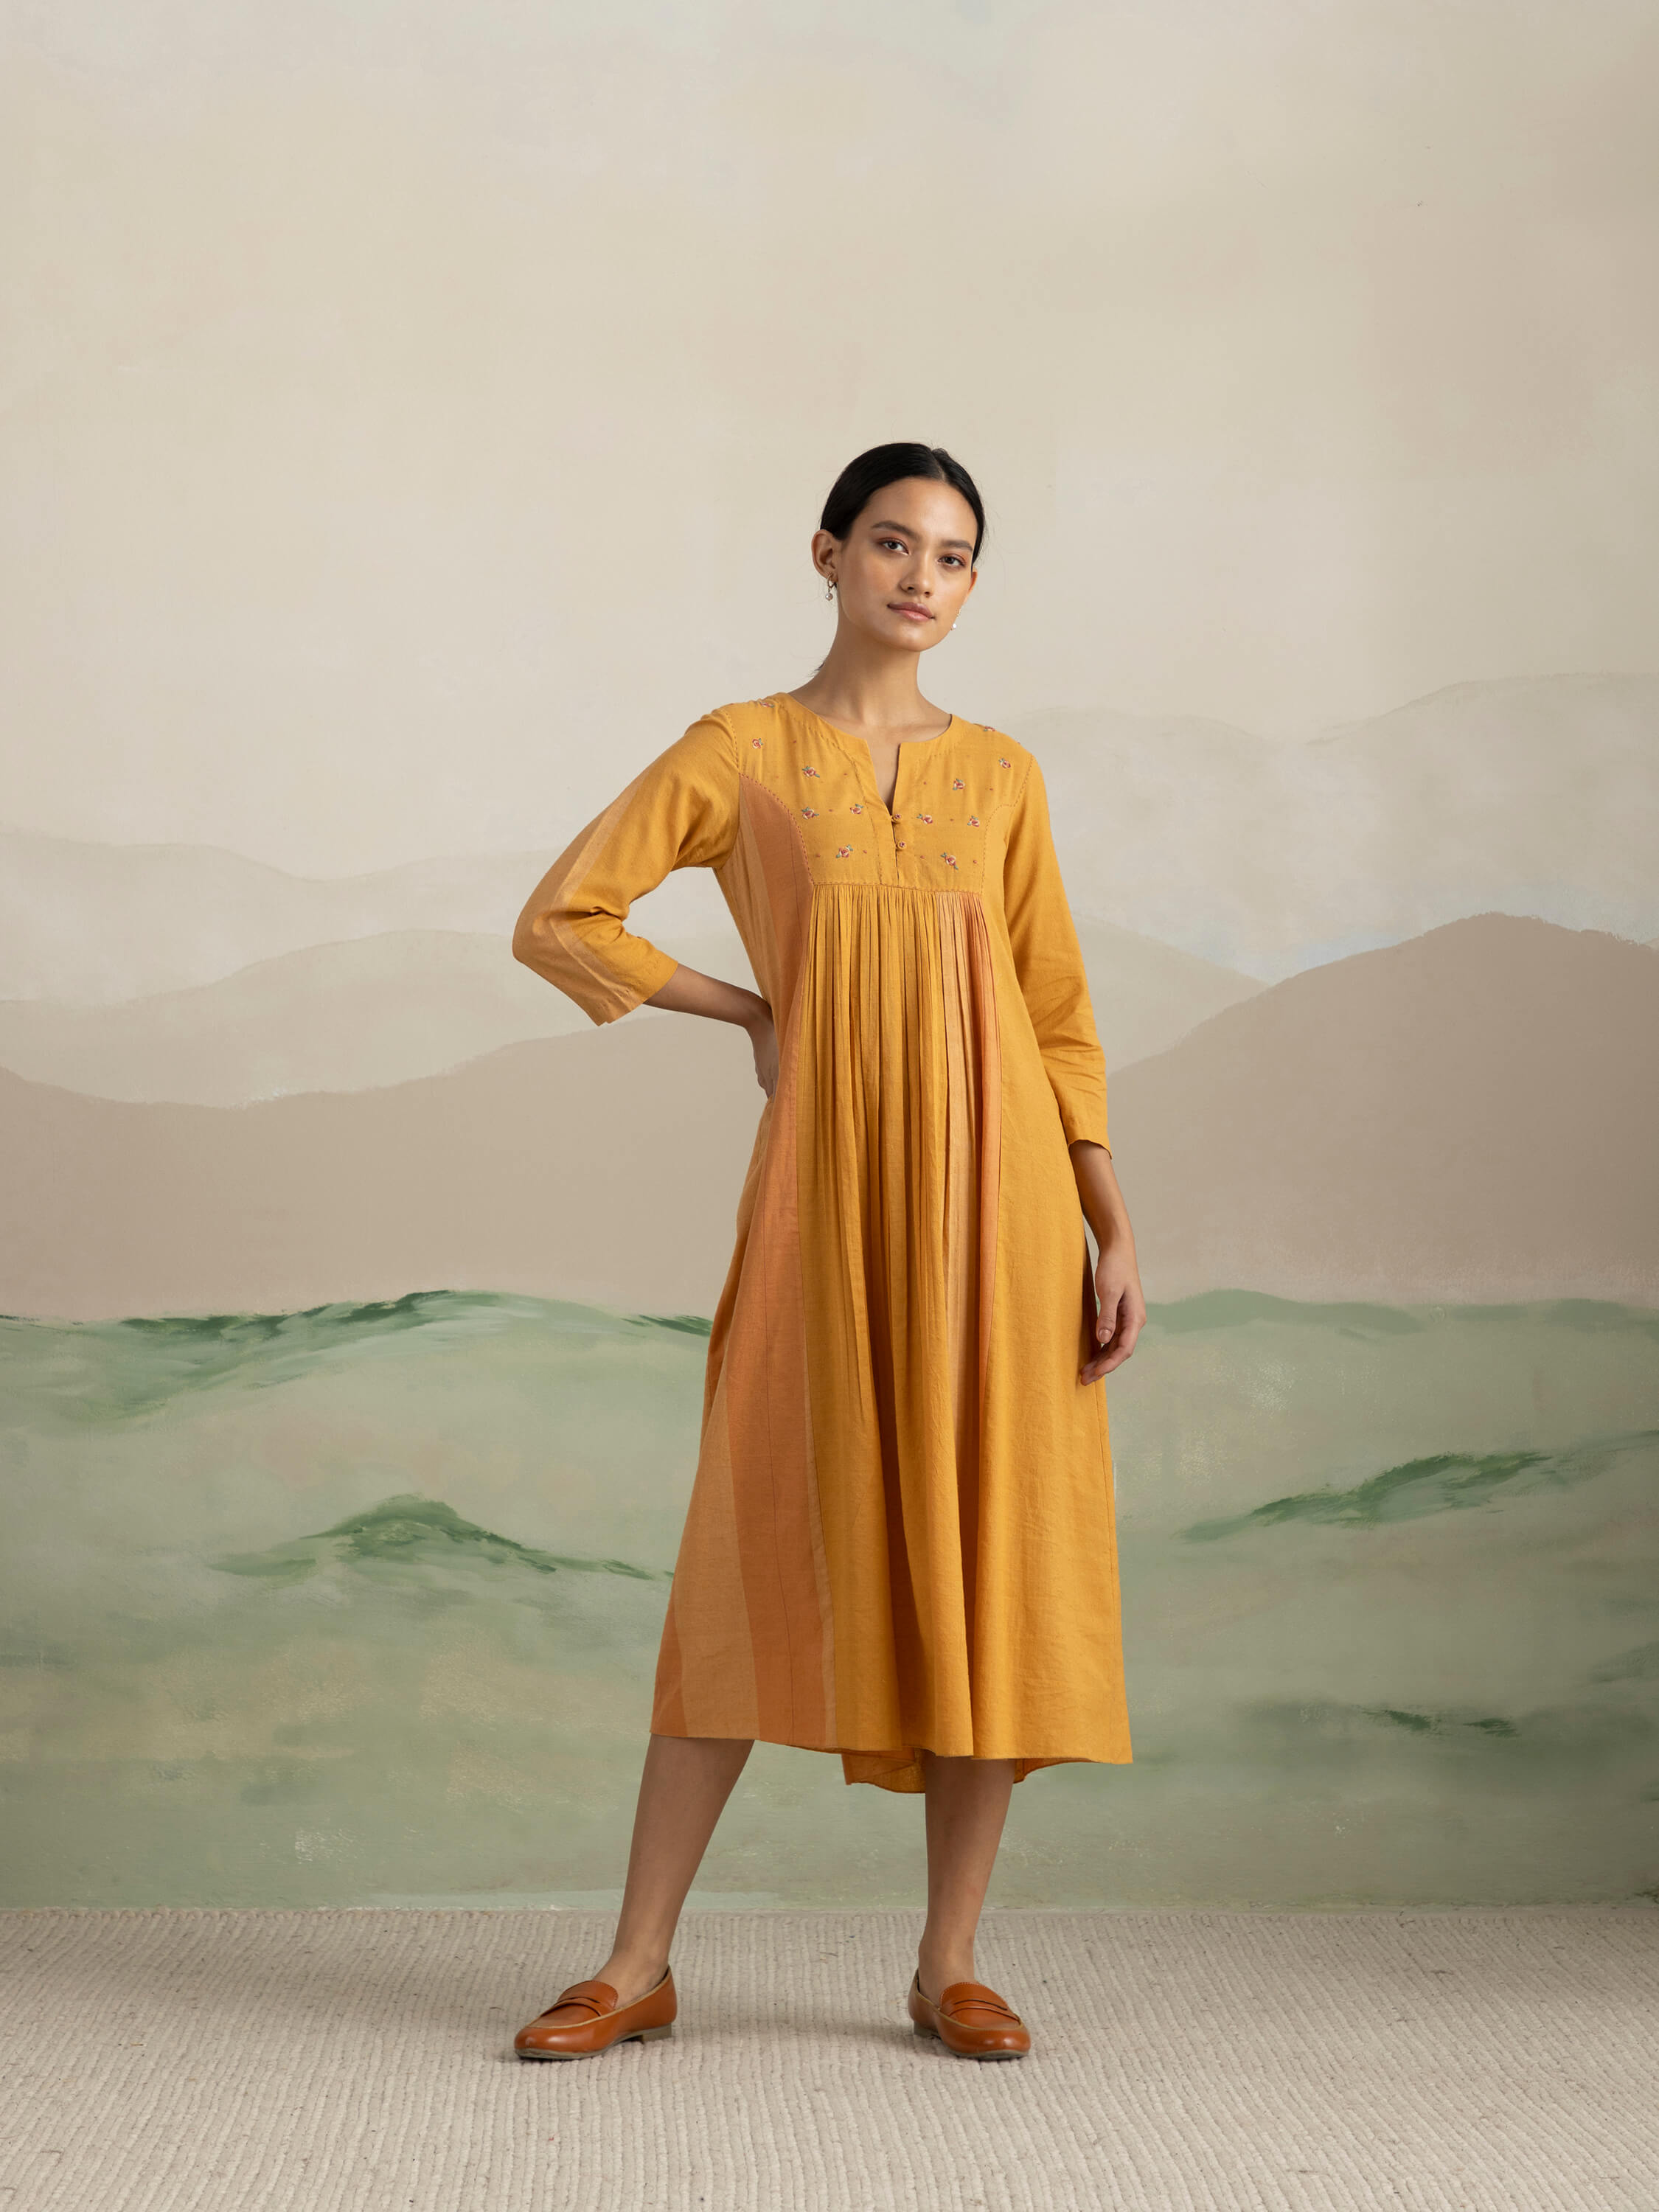 Woman wearing a yellow dress posing against a neutral background